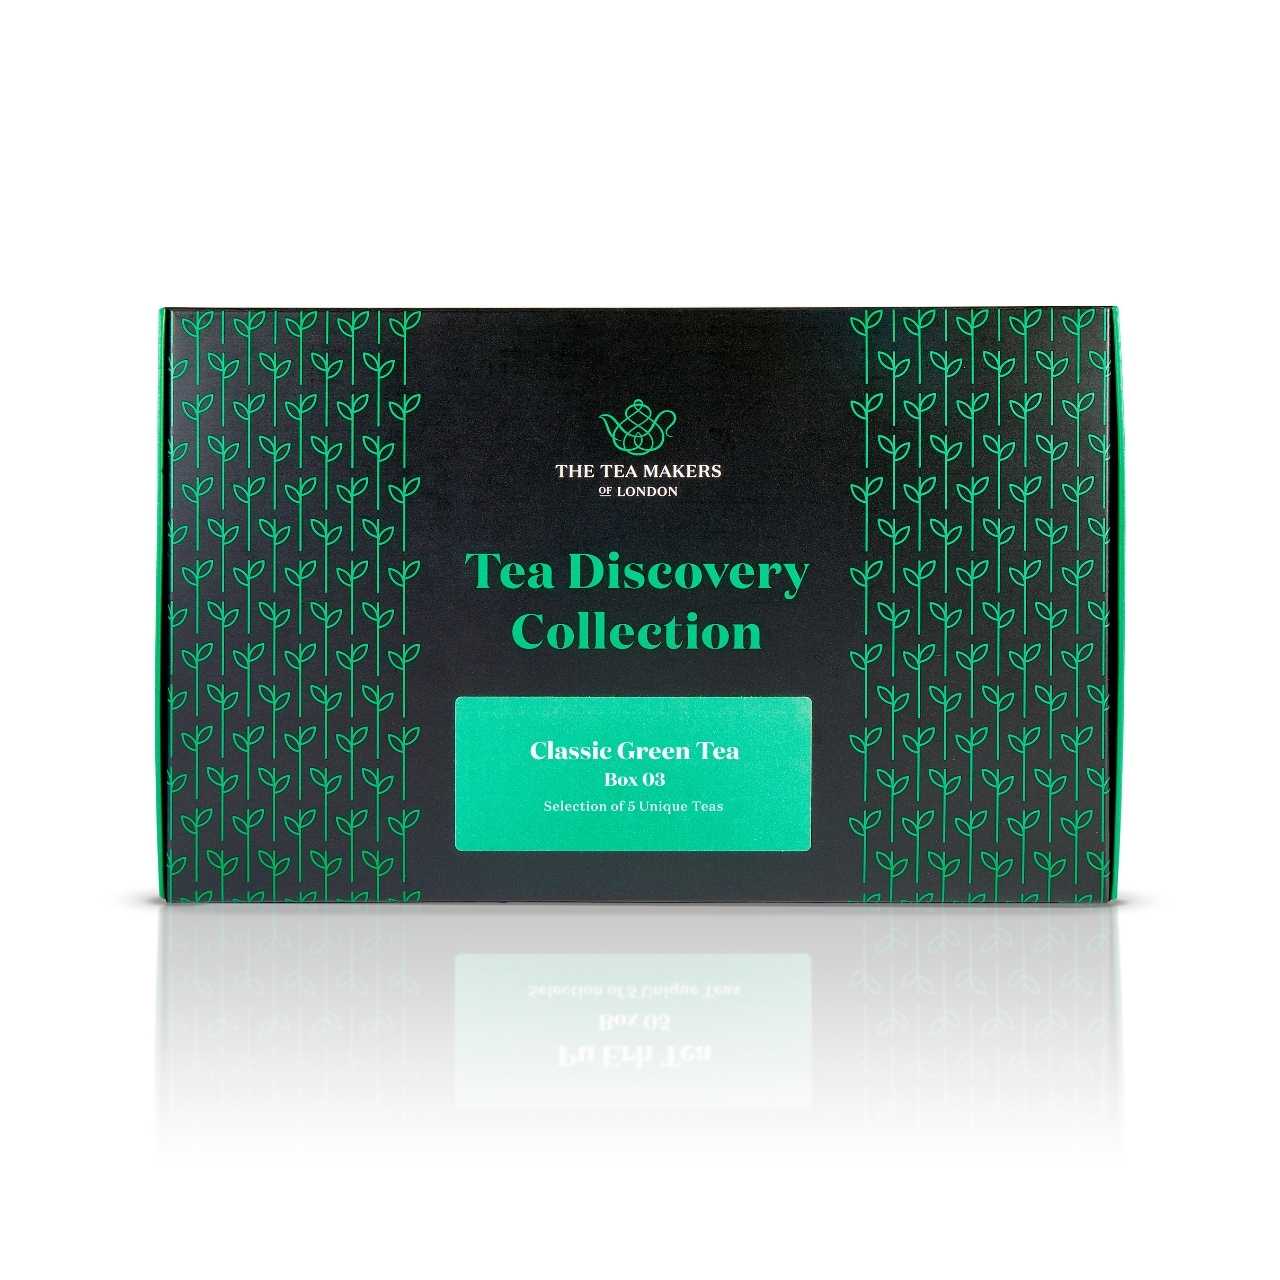 Classic Green Tea Collection outer box